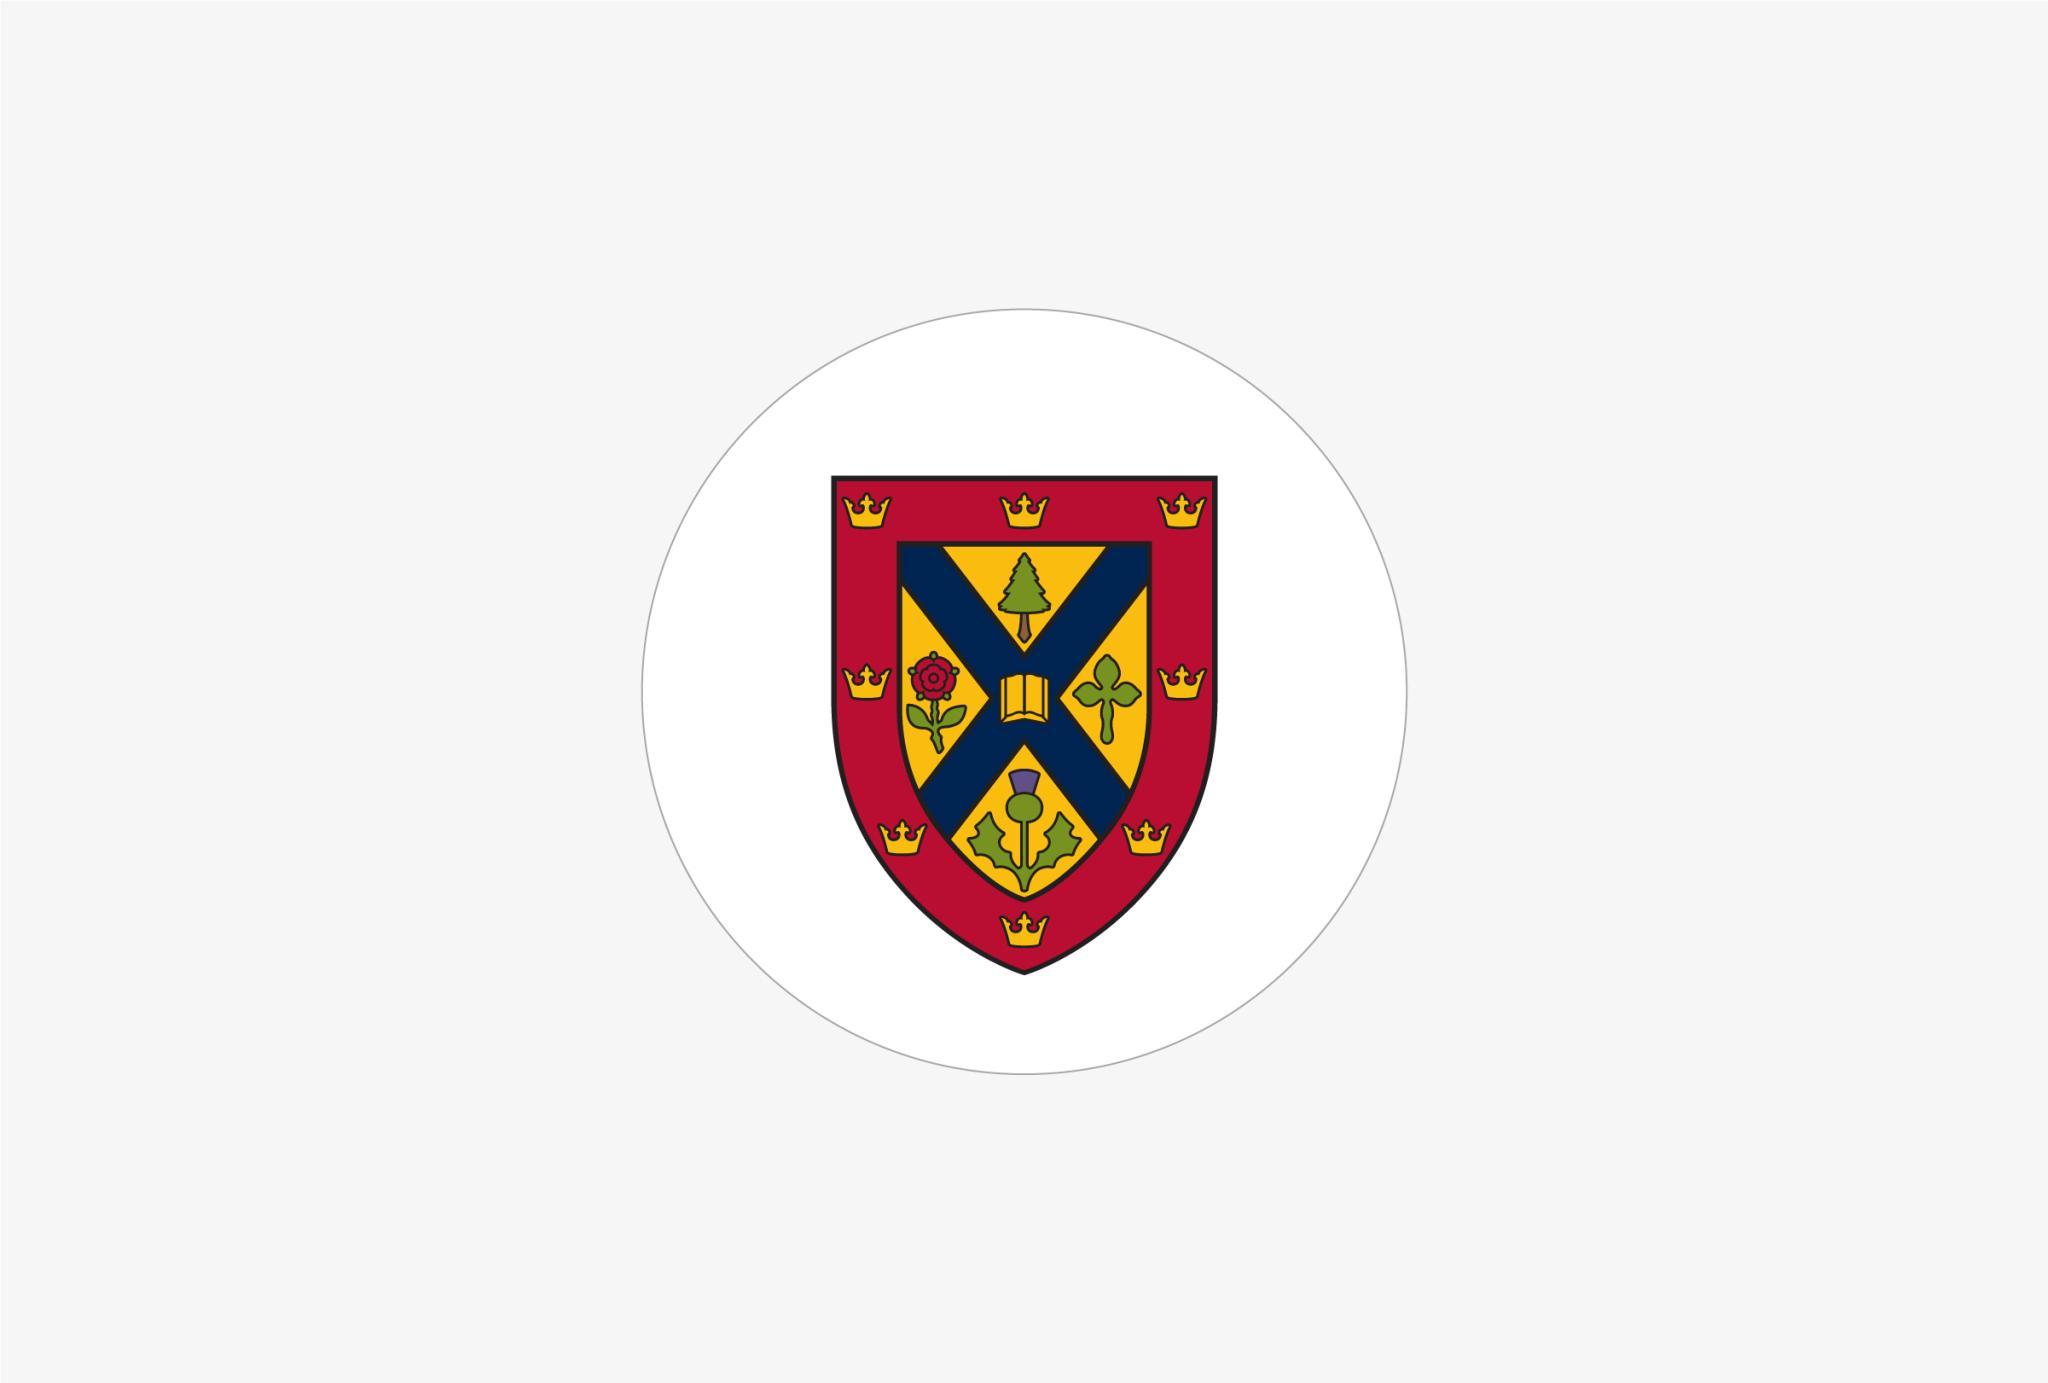 Queen's University shield as the circle profile picture